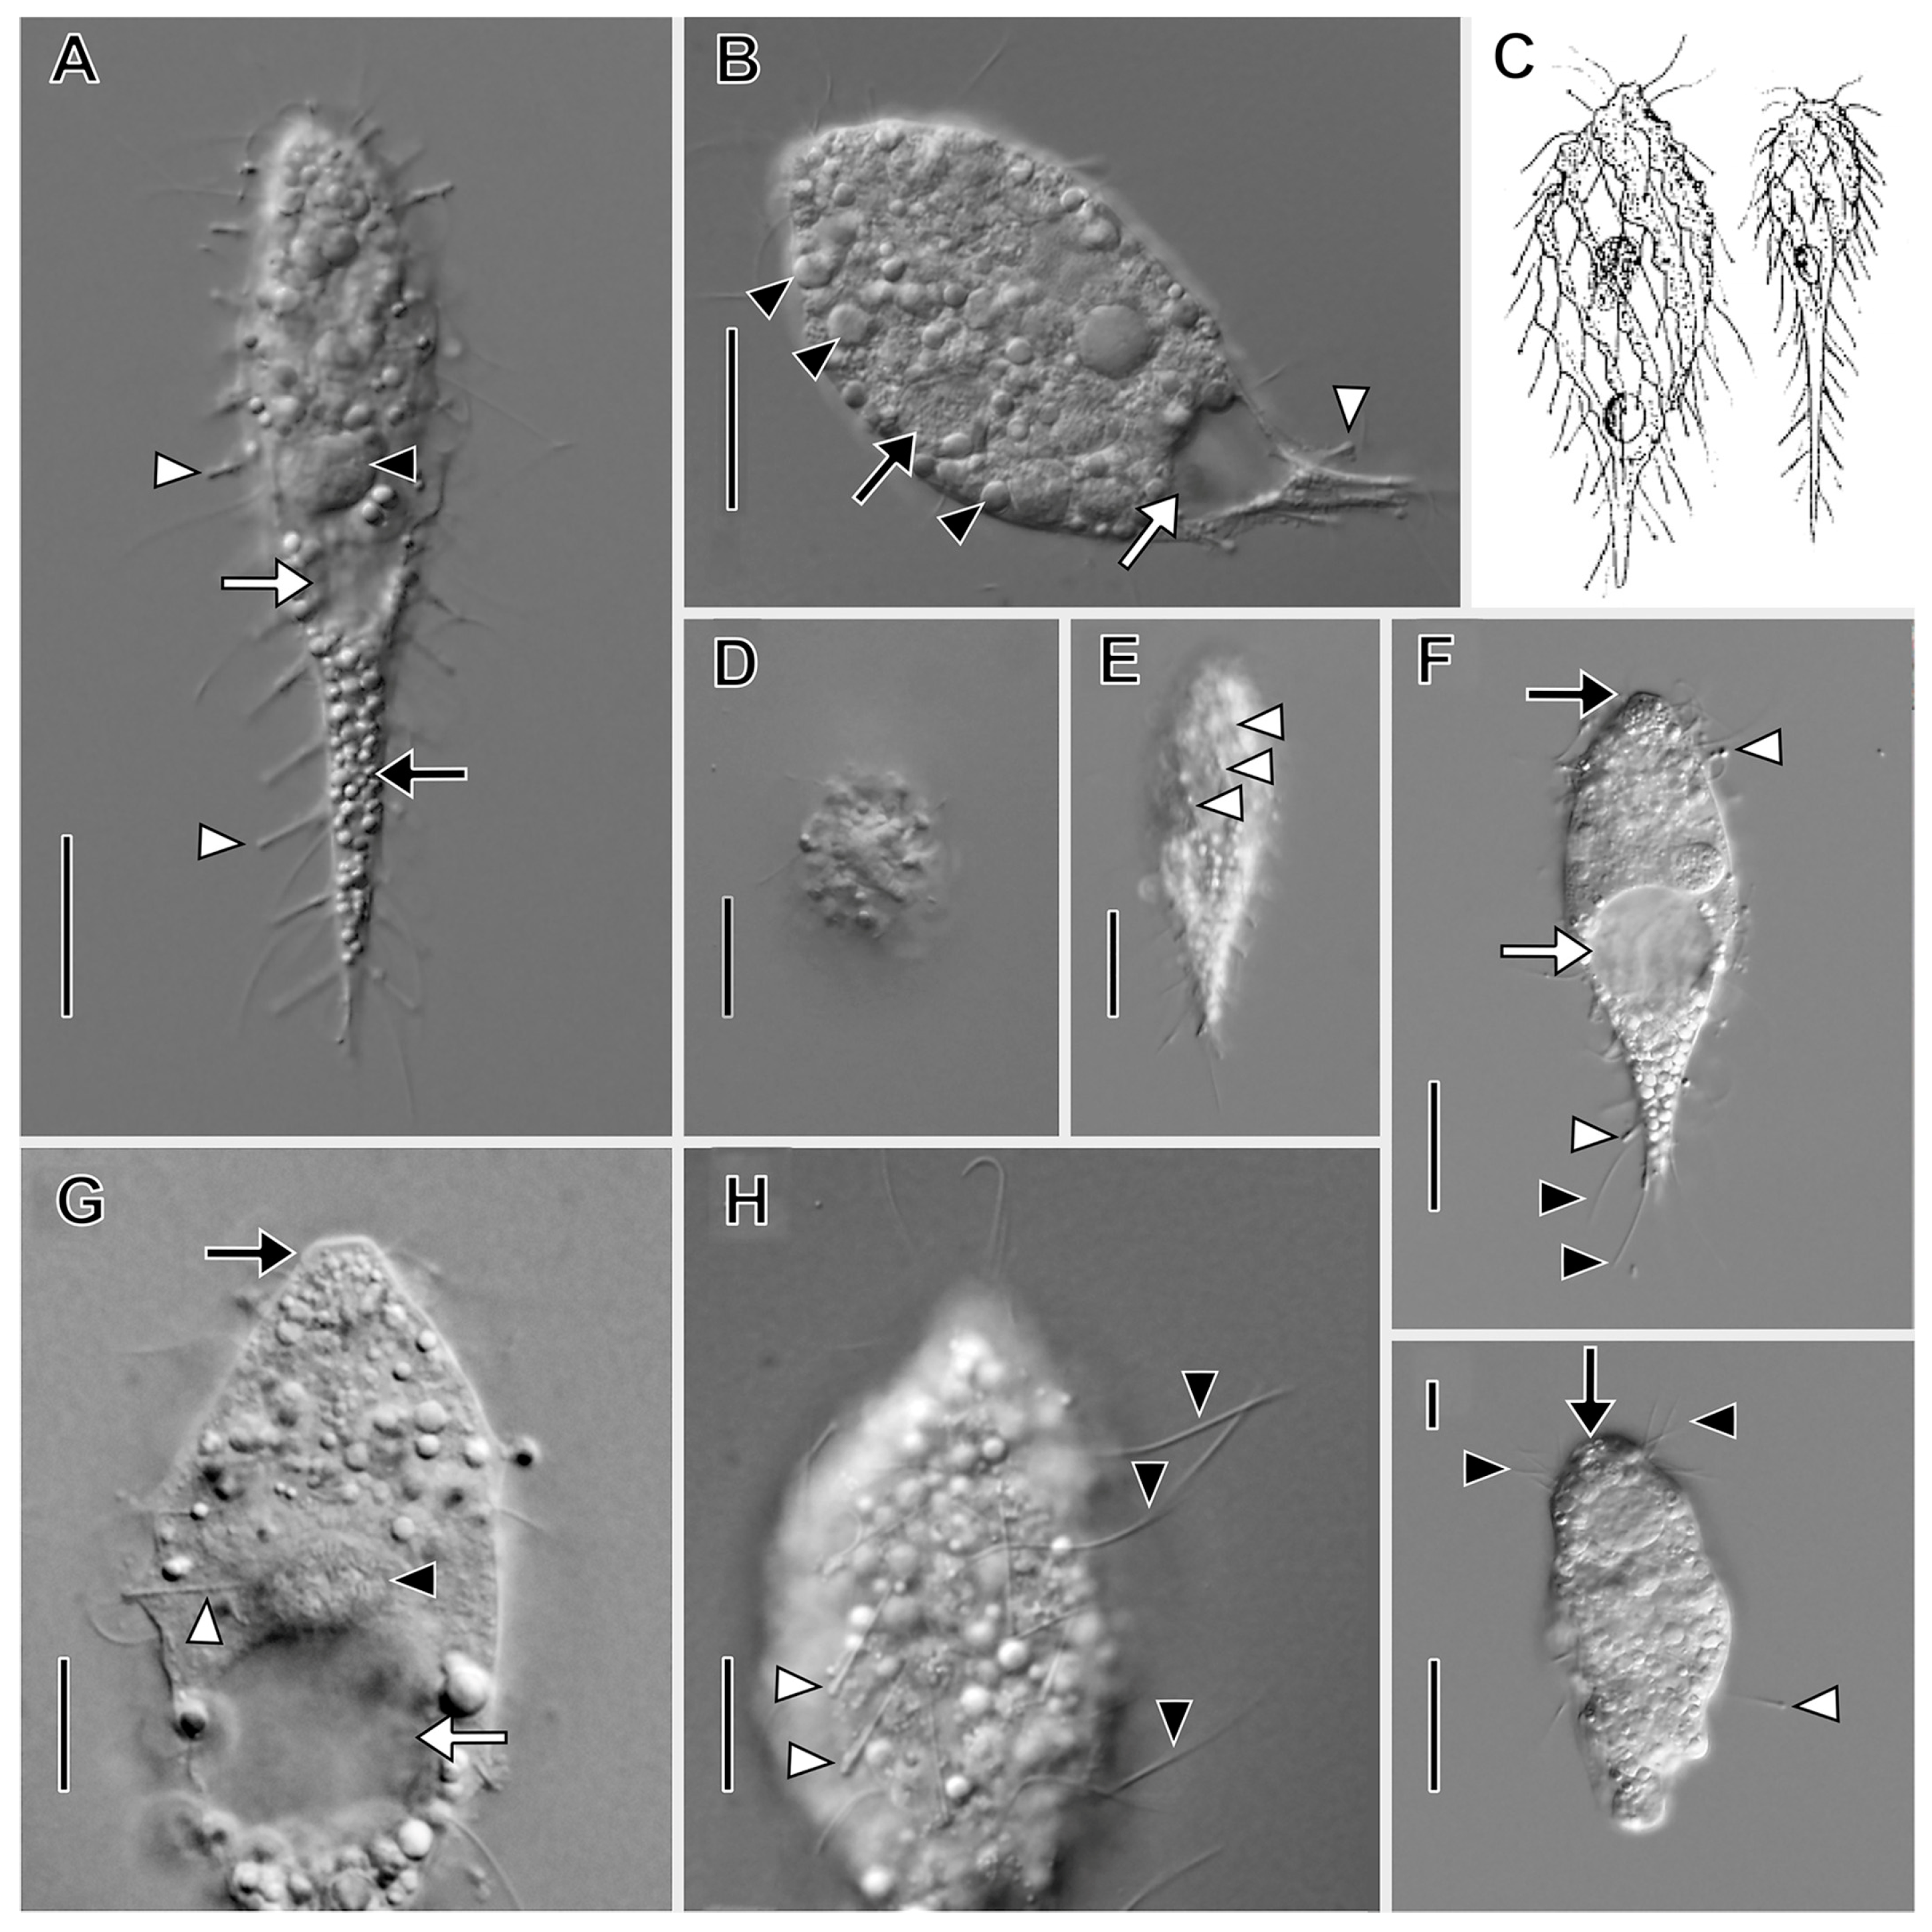 Biology Free Full-Text Rediscovery of Remarkably Rare Anaerobic Tentaculiferous Ciliate Genera Legendrea and Dactylochlamys (Ciliophora Litostomatea) picture